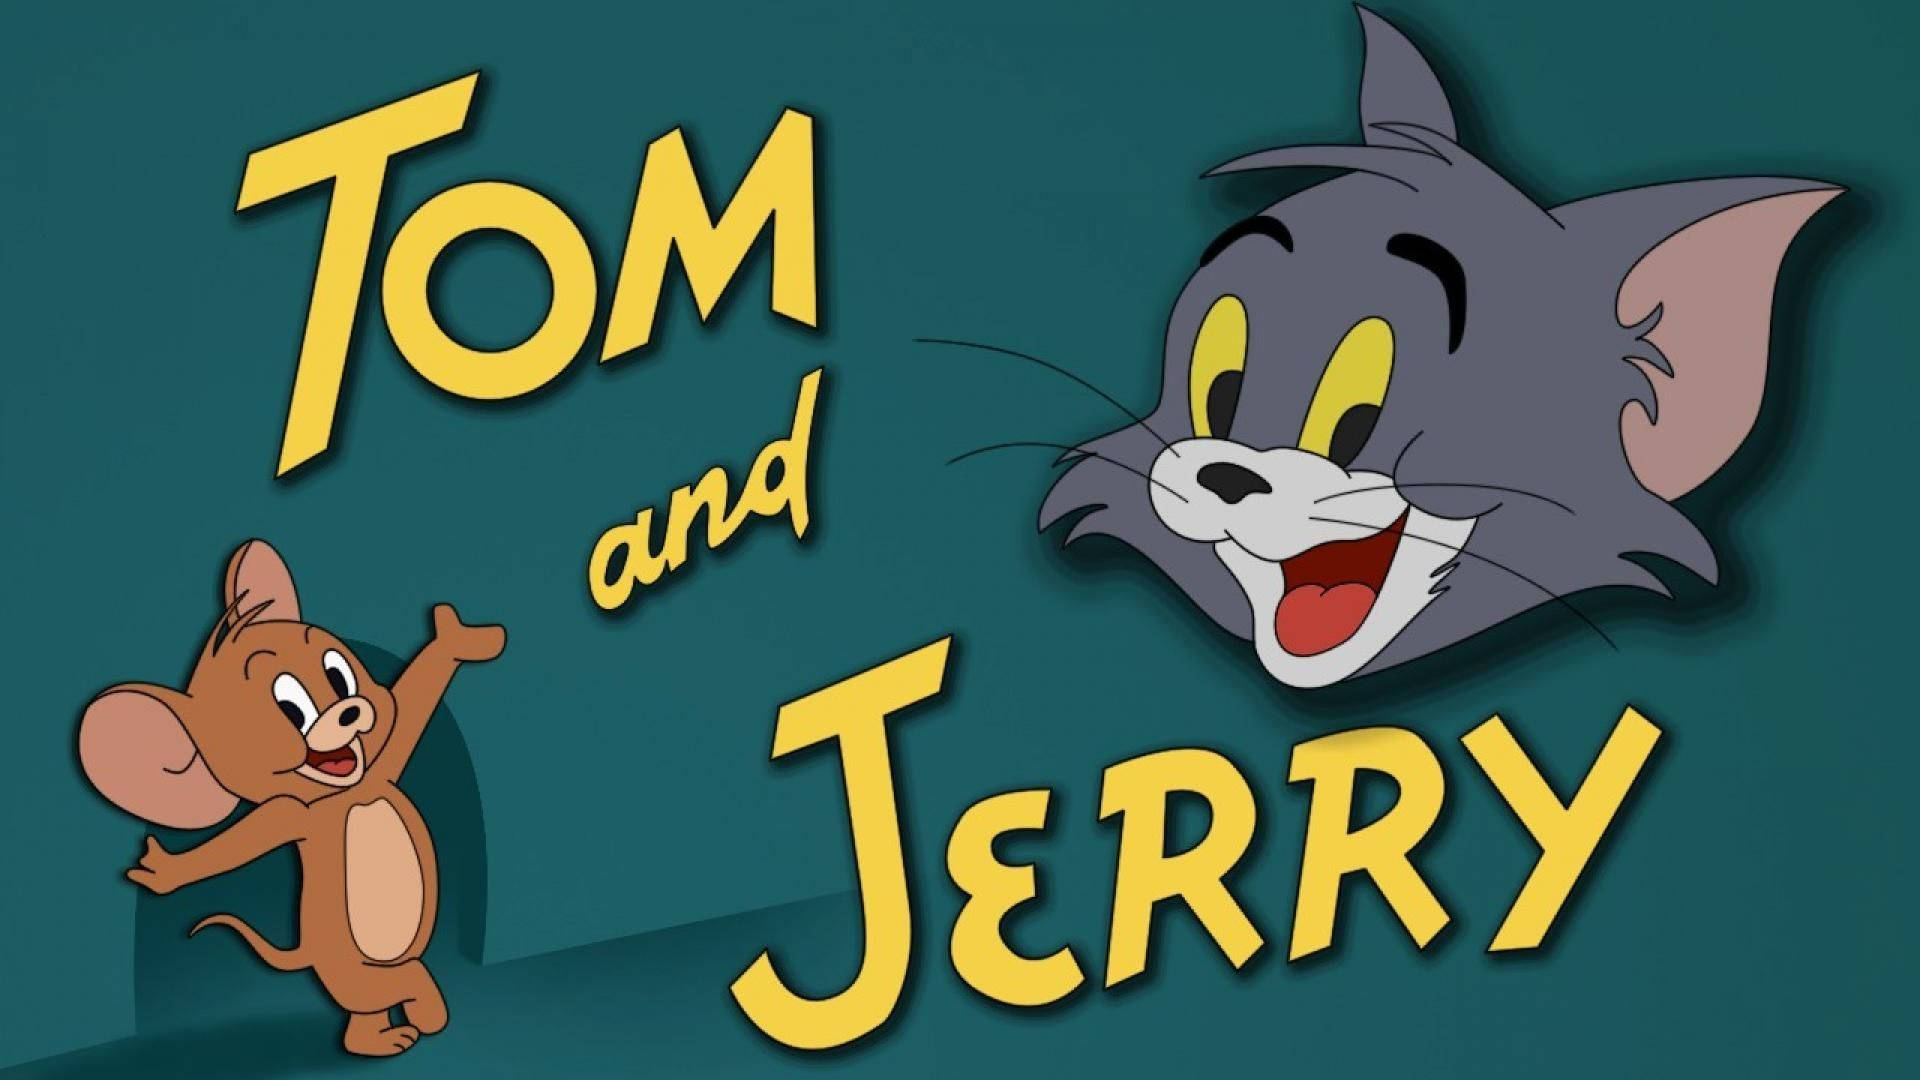 Tom Cat With Little Mouse Jerry Wallpaper